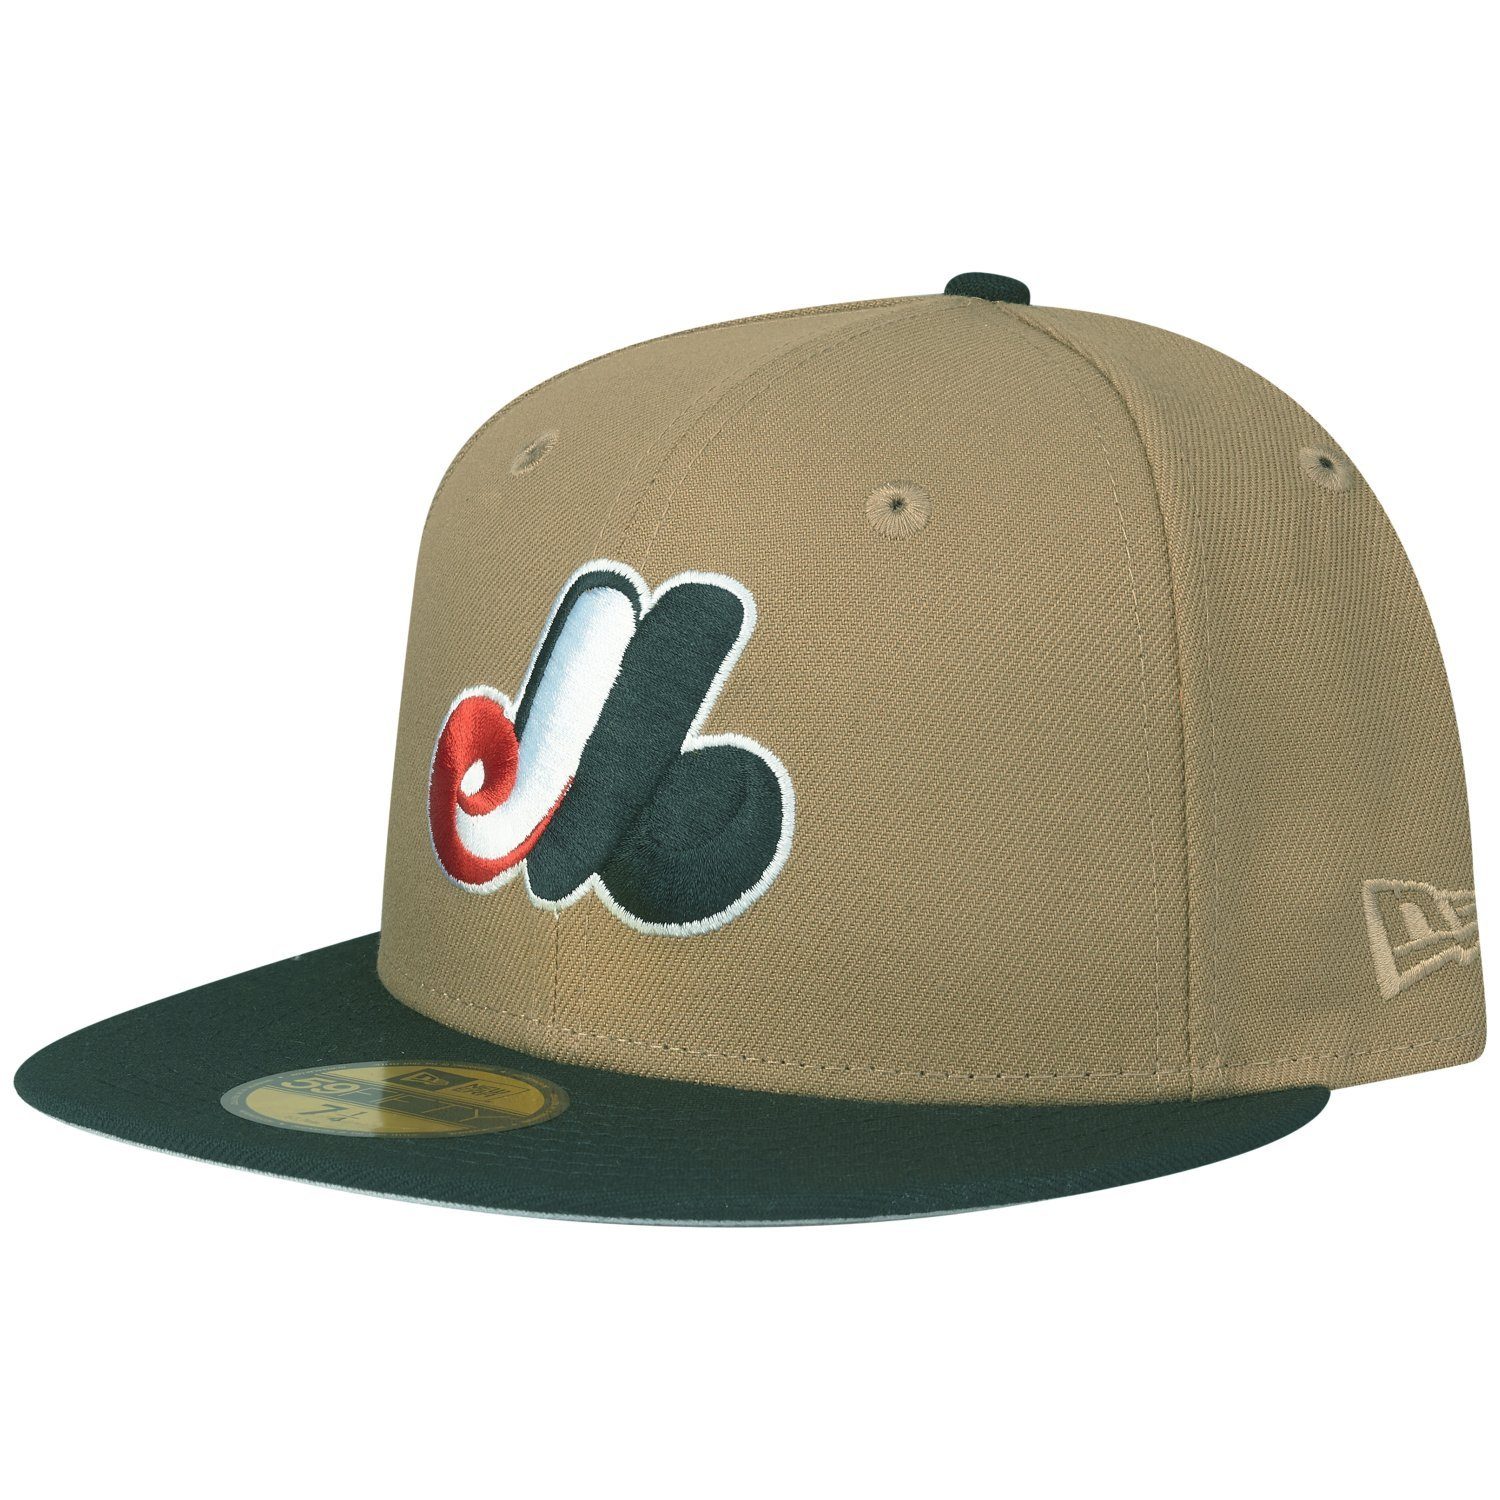 Expos Cap New 59Fifty Fitted Montreal Era